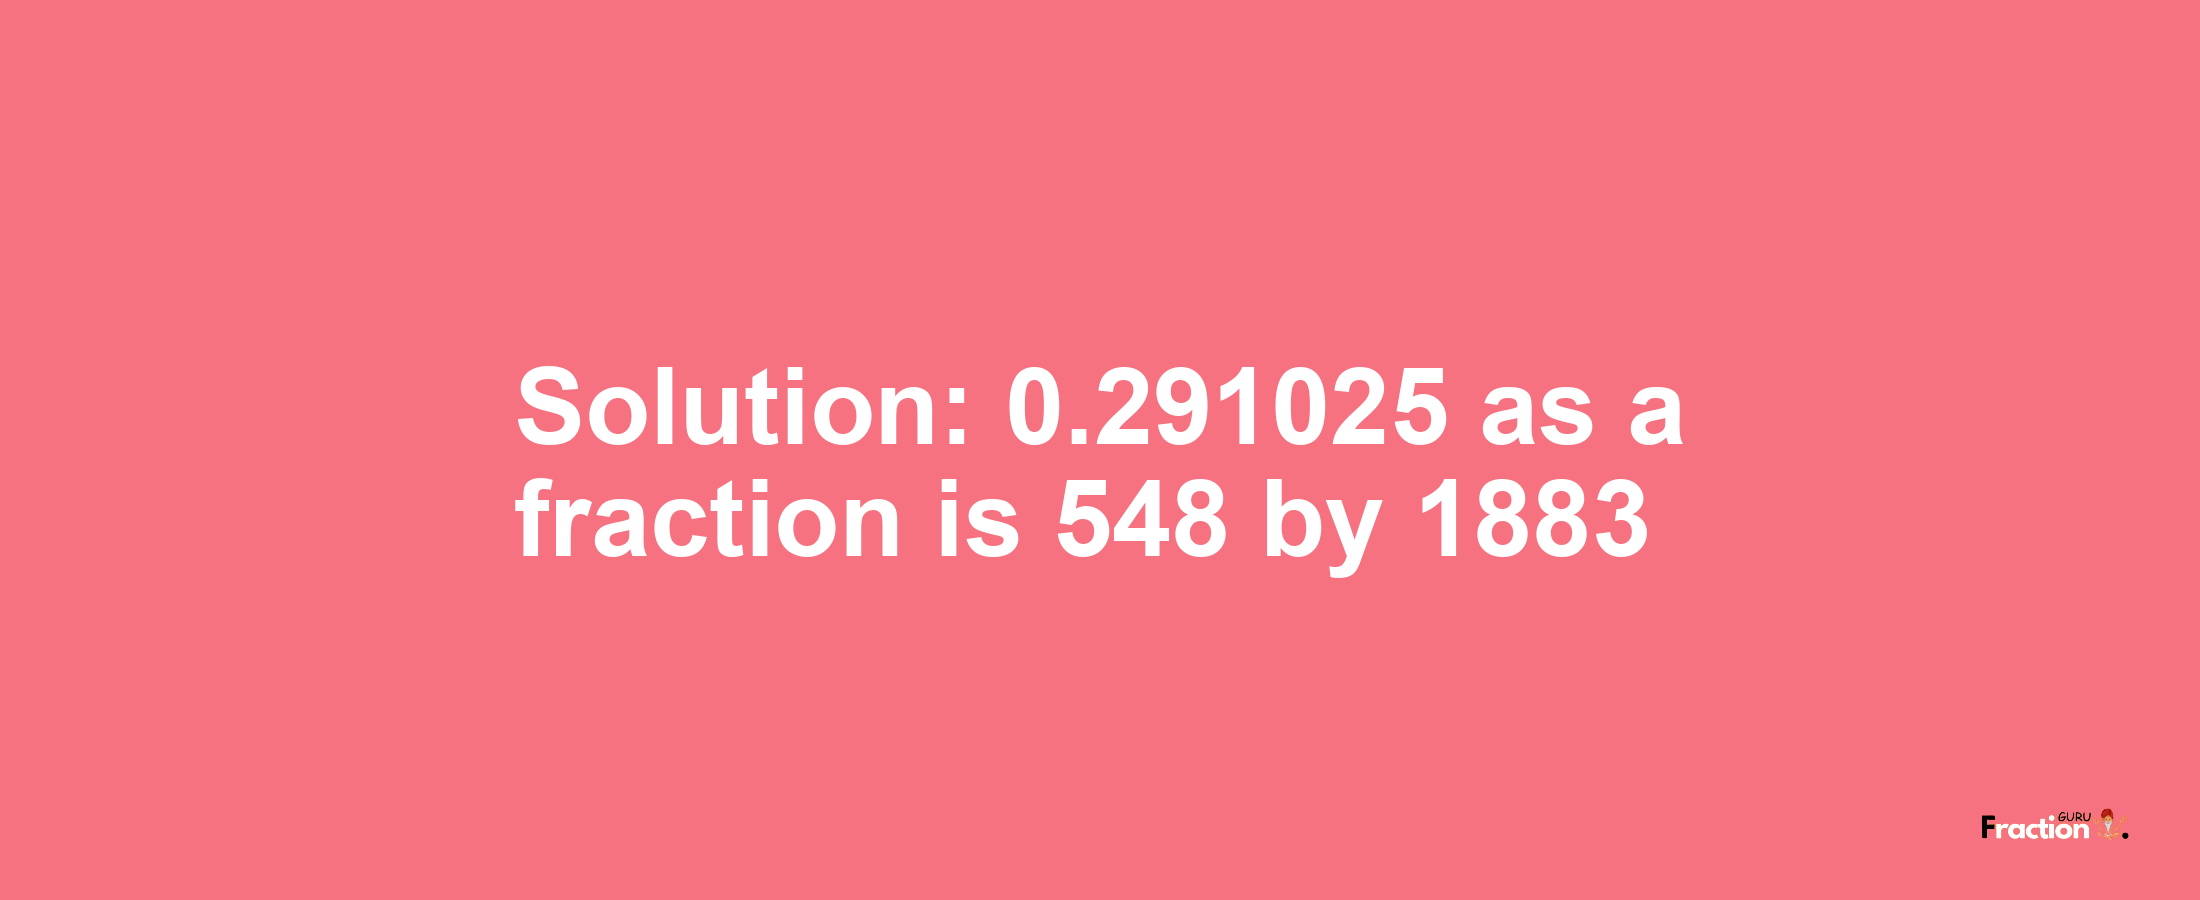 Solution:0.291025 as a fraction is 548/1883